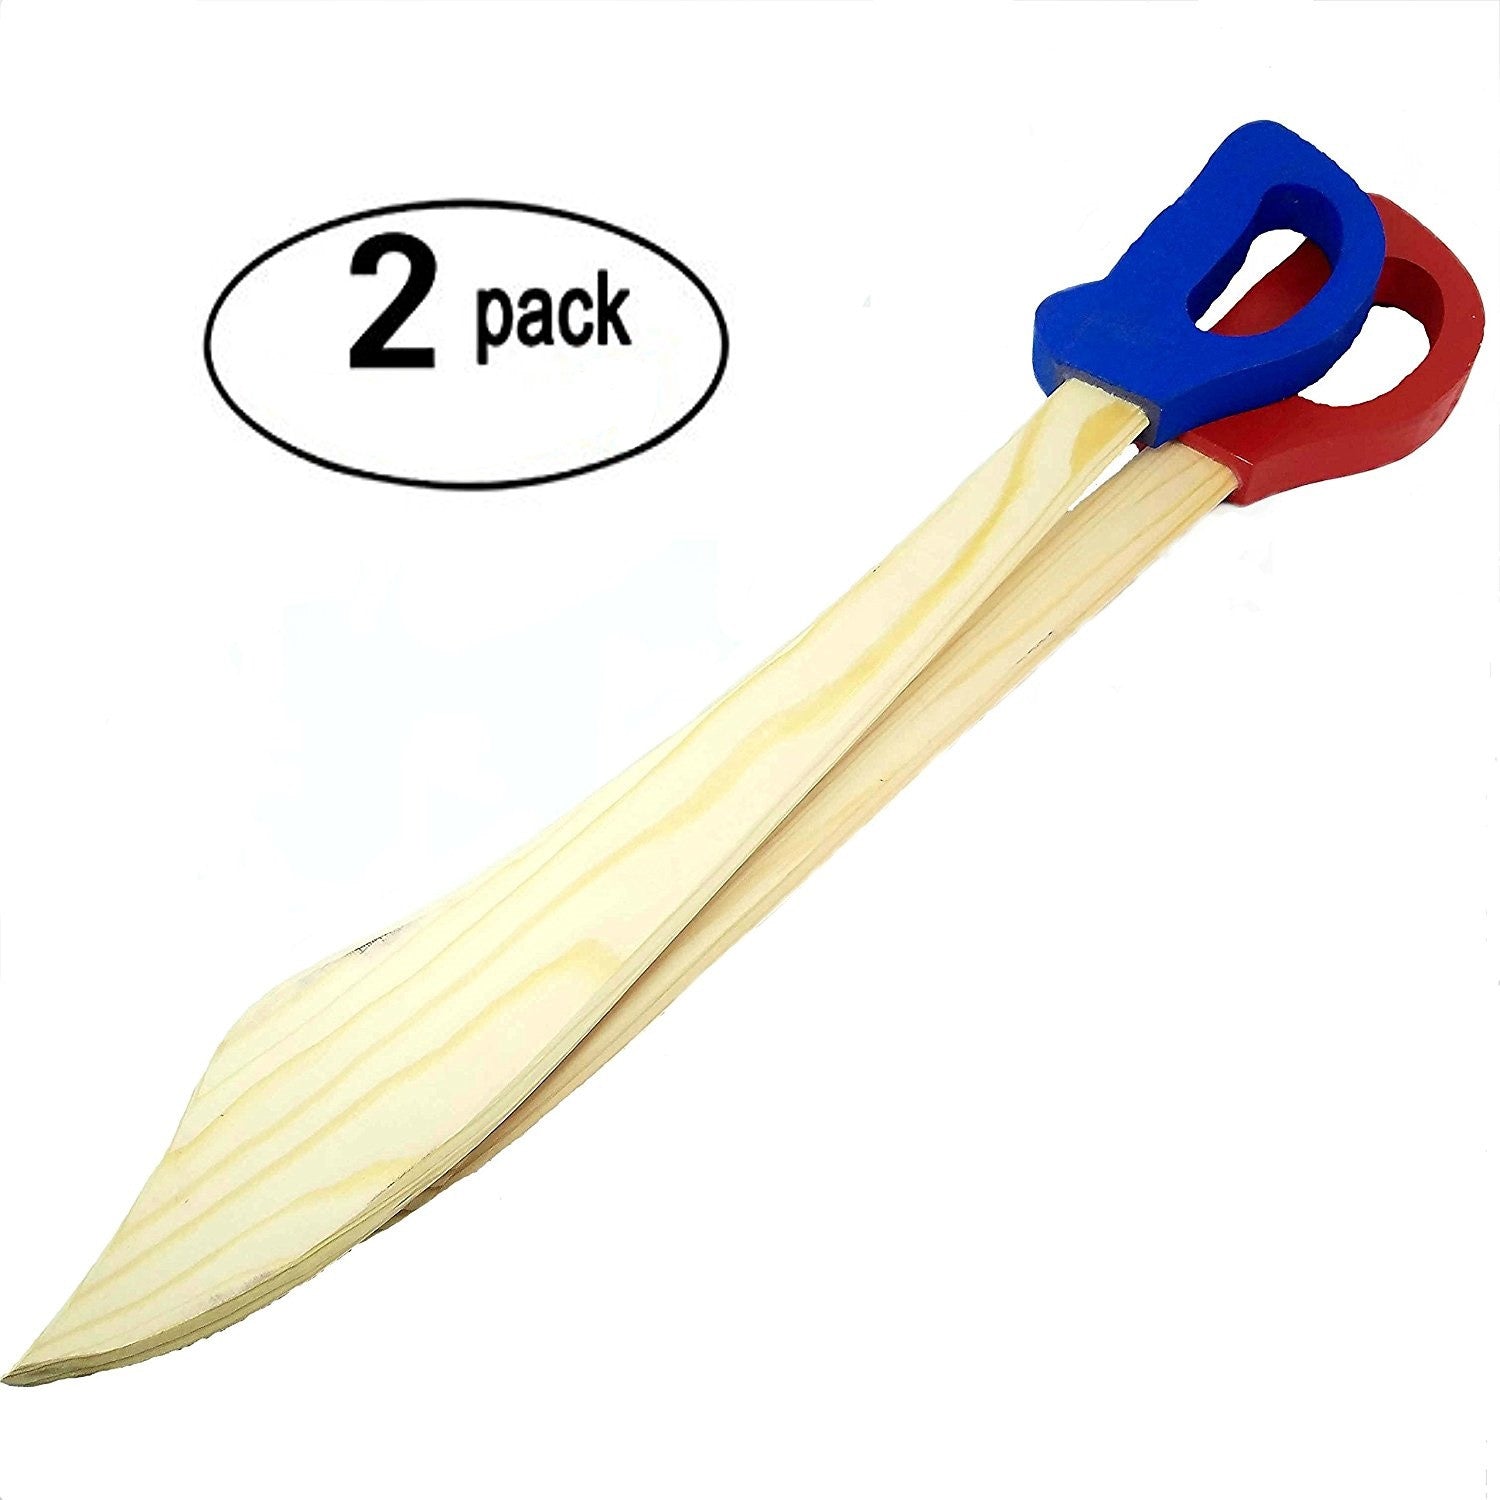 Solid Colored Handle (With Guard) Wooden Toy Sword 2-Pack